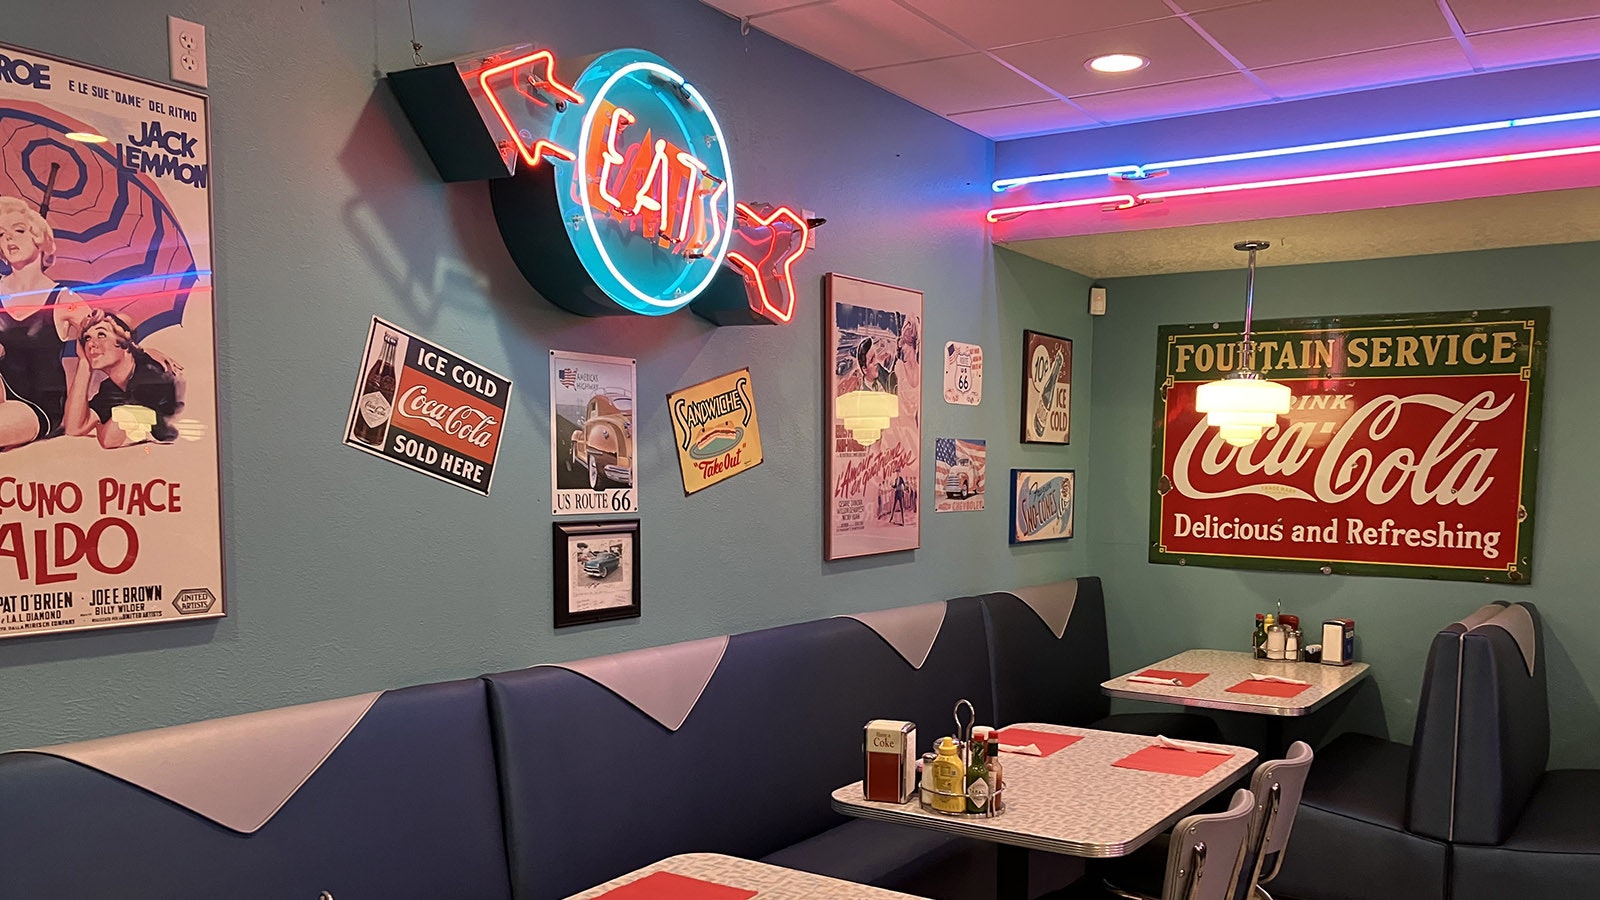 Checkered floors, tables and booths all reflect the diner atmosphere of the 1950s.